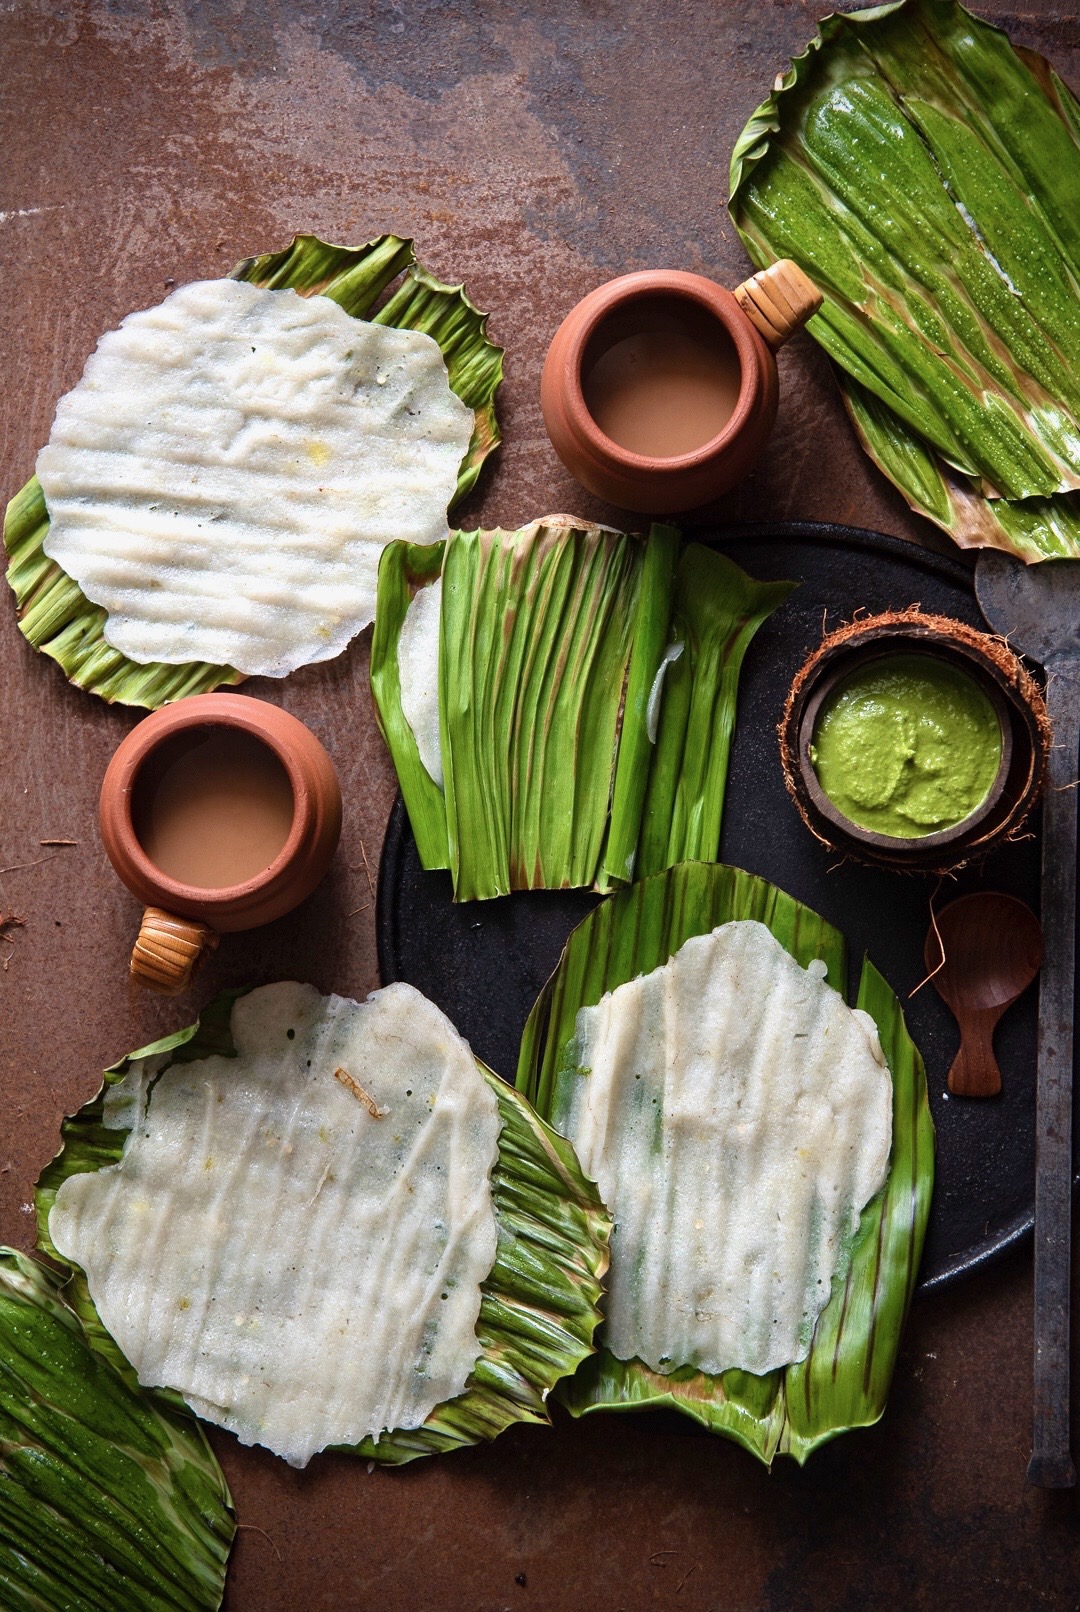 Panki -delicate rice flour crepes steamed in banana leaf - theroute2roots